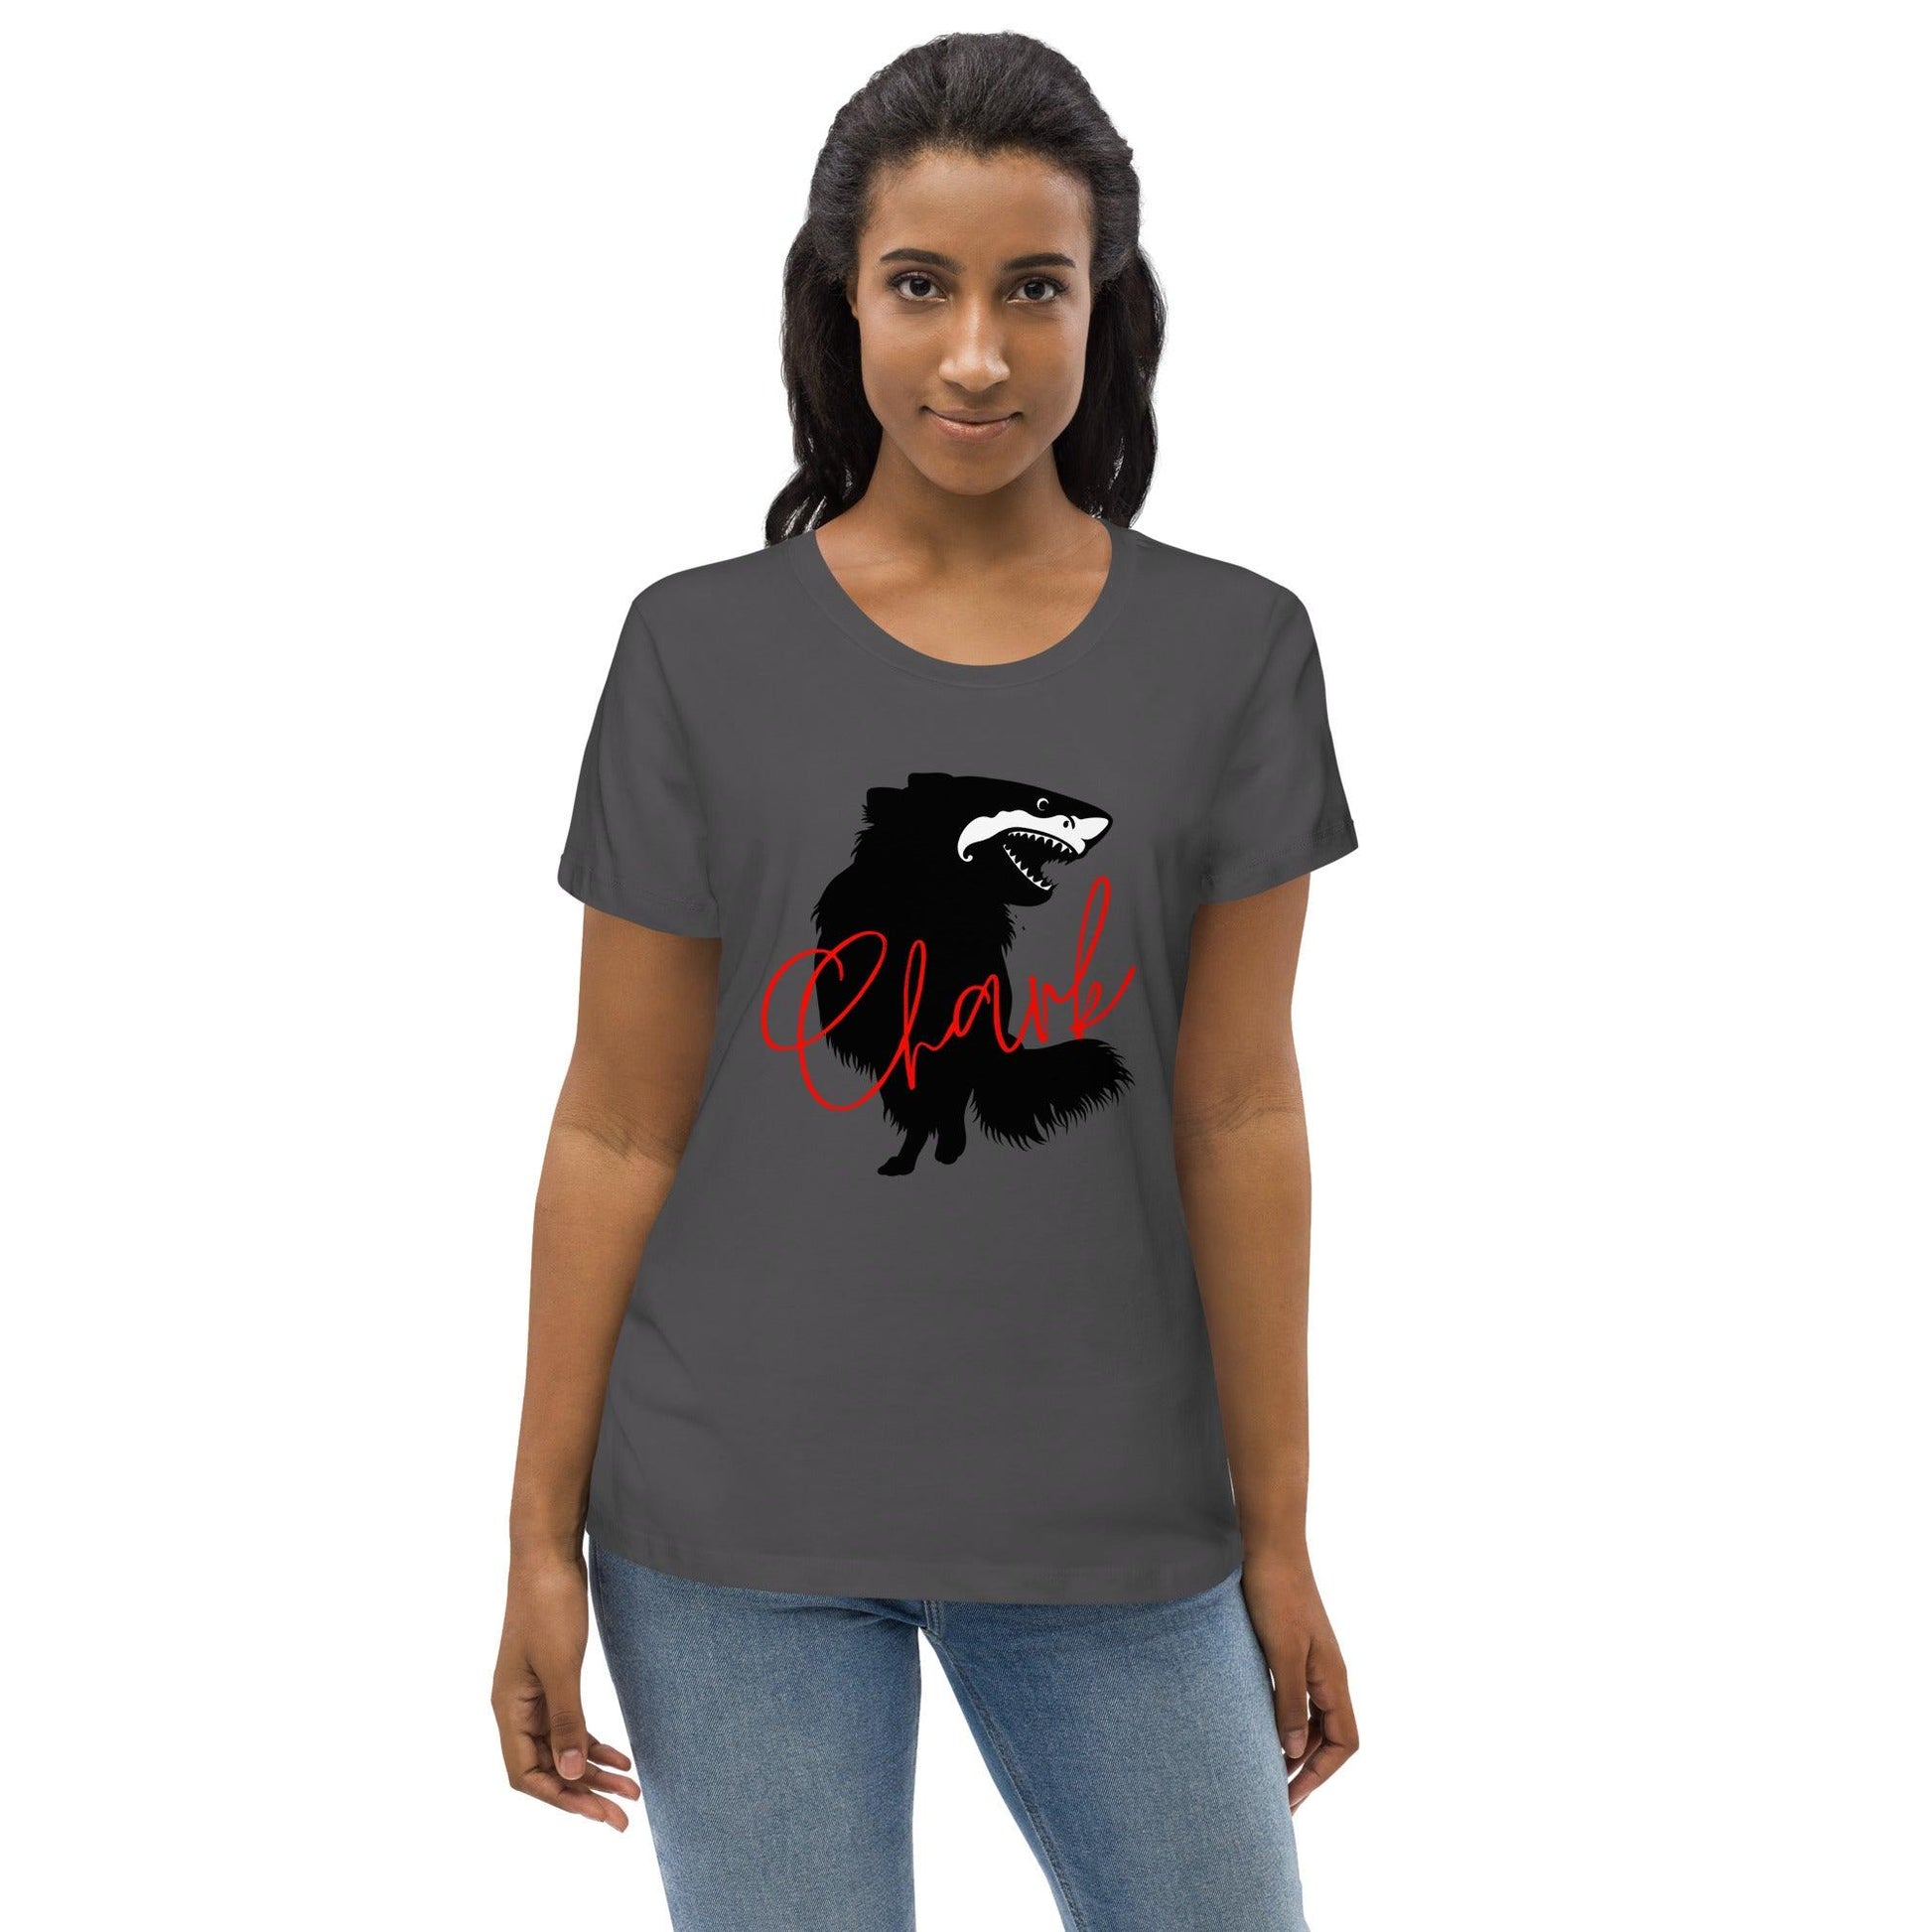 Chihuahua + Shark = Chark women's fitted t-shirt. Front: black silhouette of a longhaired chihuahua with the face of a great white shark + "Chark" in red cursive font. Back: another shark-faced chihuahua silhouette running across the shoulder blades + dictionary entry of the noun "chark": a chihuahua with teeth like a shark. 100% pure organic cotton. Dark grey. Design by Renate Kriegler, owner of Chimigos - for the love of chihuahuas. More on chimigos.com